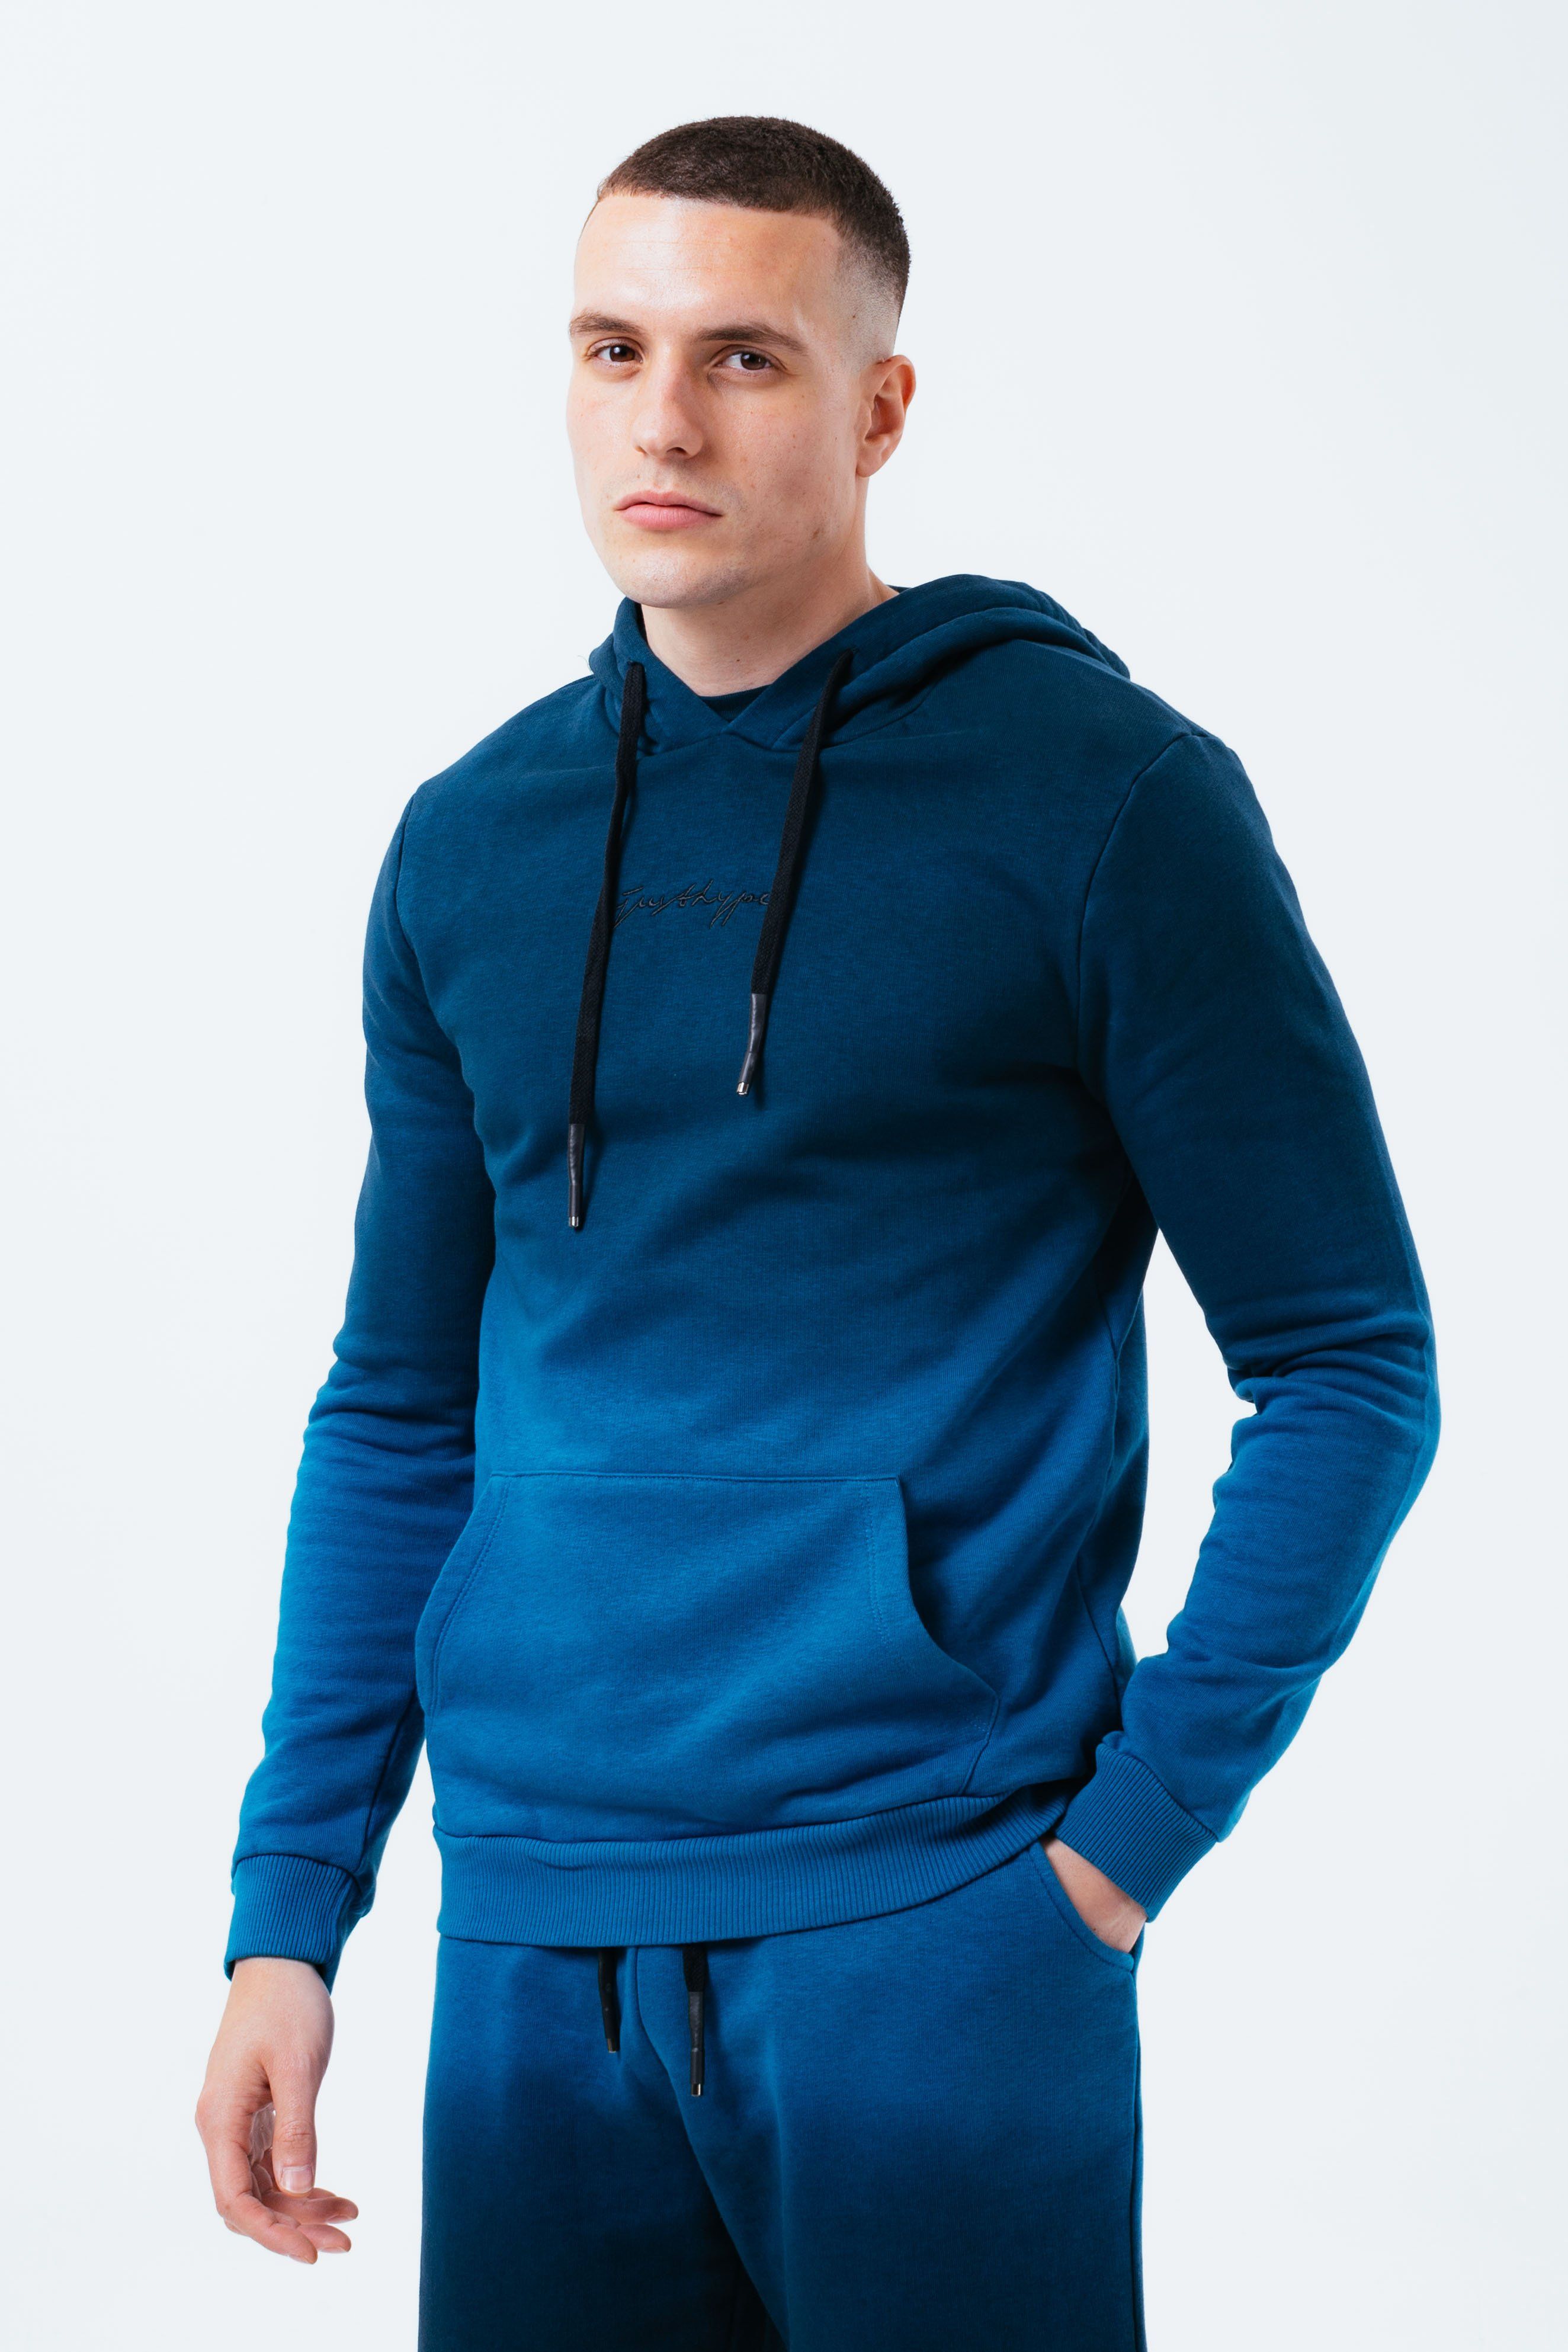 The HYPE. Blue Fade Men's Pullover Hoodie is your new go-to everyday essential. Designed in our standard men's hoodie shape, with a fixed hoot, kangaroo pocket and fitted hem and cuffs. With a 80% cotton and 20% polyester fabric base for supreme comfort and breathable space. With our signature all-over gradient fade effect in a light blue and navy colour palette. Finished with the new! embroidered just hype signature logo embroidered on the front in a contrasting black. Wear with black skinny fit jeans for a smart casual look. Machine washable.